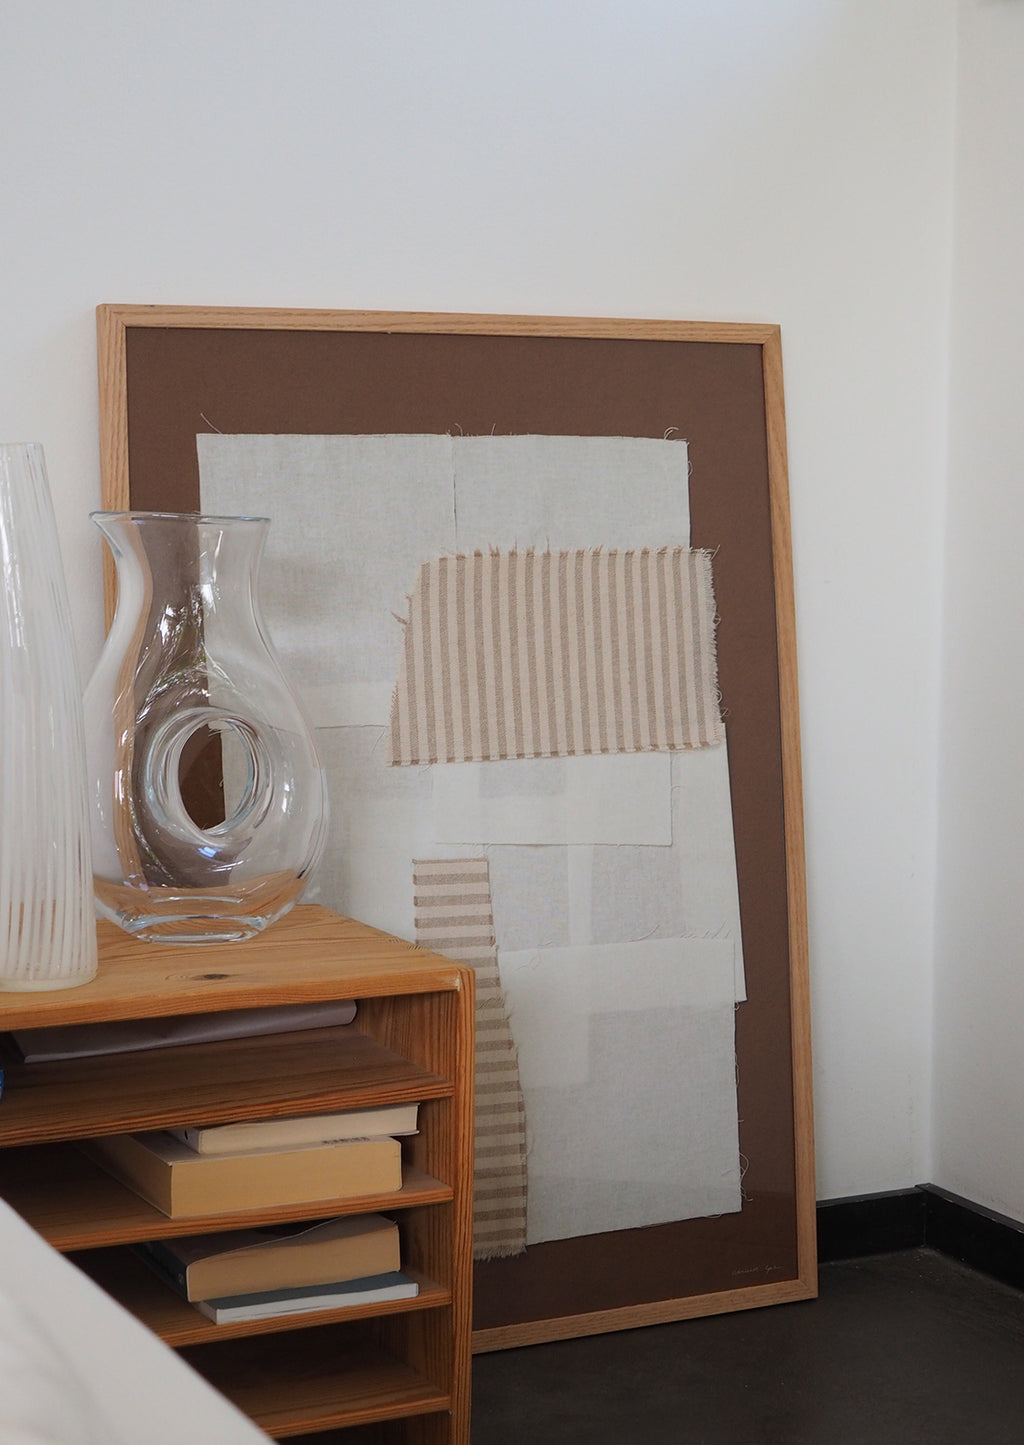 2: A brown art print with photographed textiles in ivory and tan stripes.